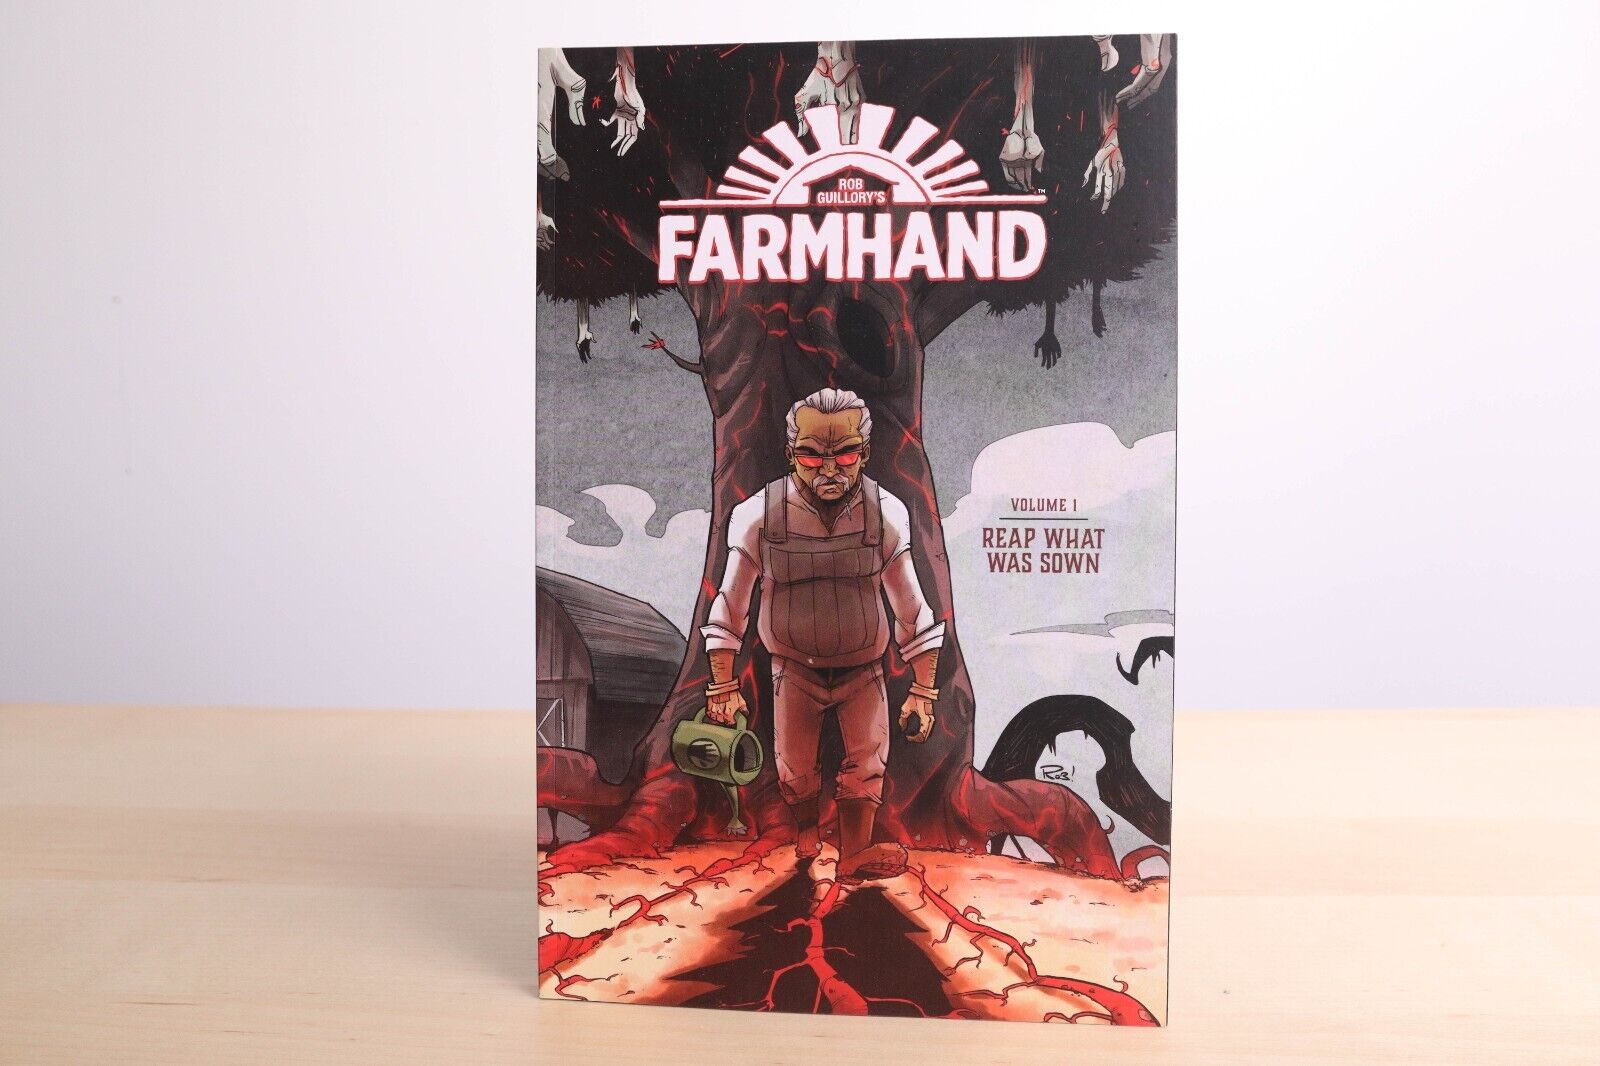 Farmhand Vol. 1 “Reap What Was Sown” Rob Guillory TPB Image Comics - 2019